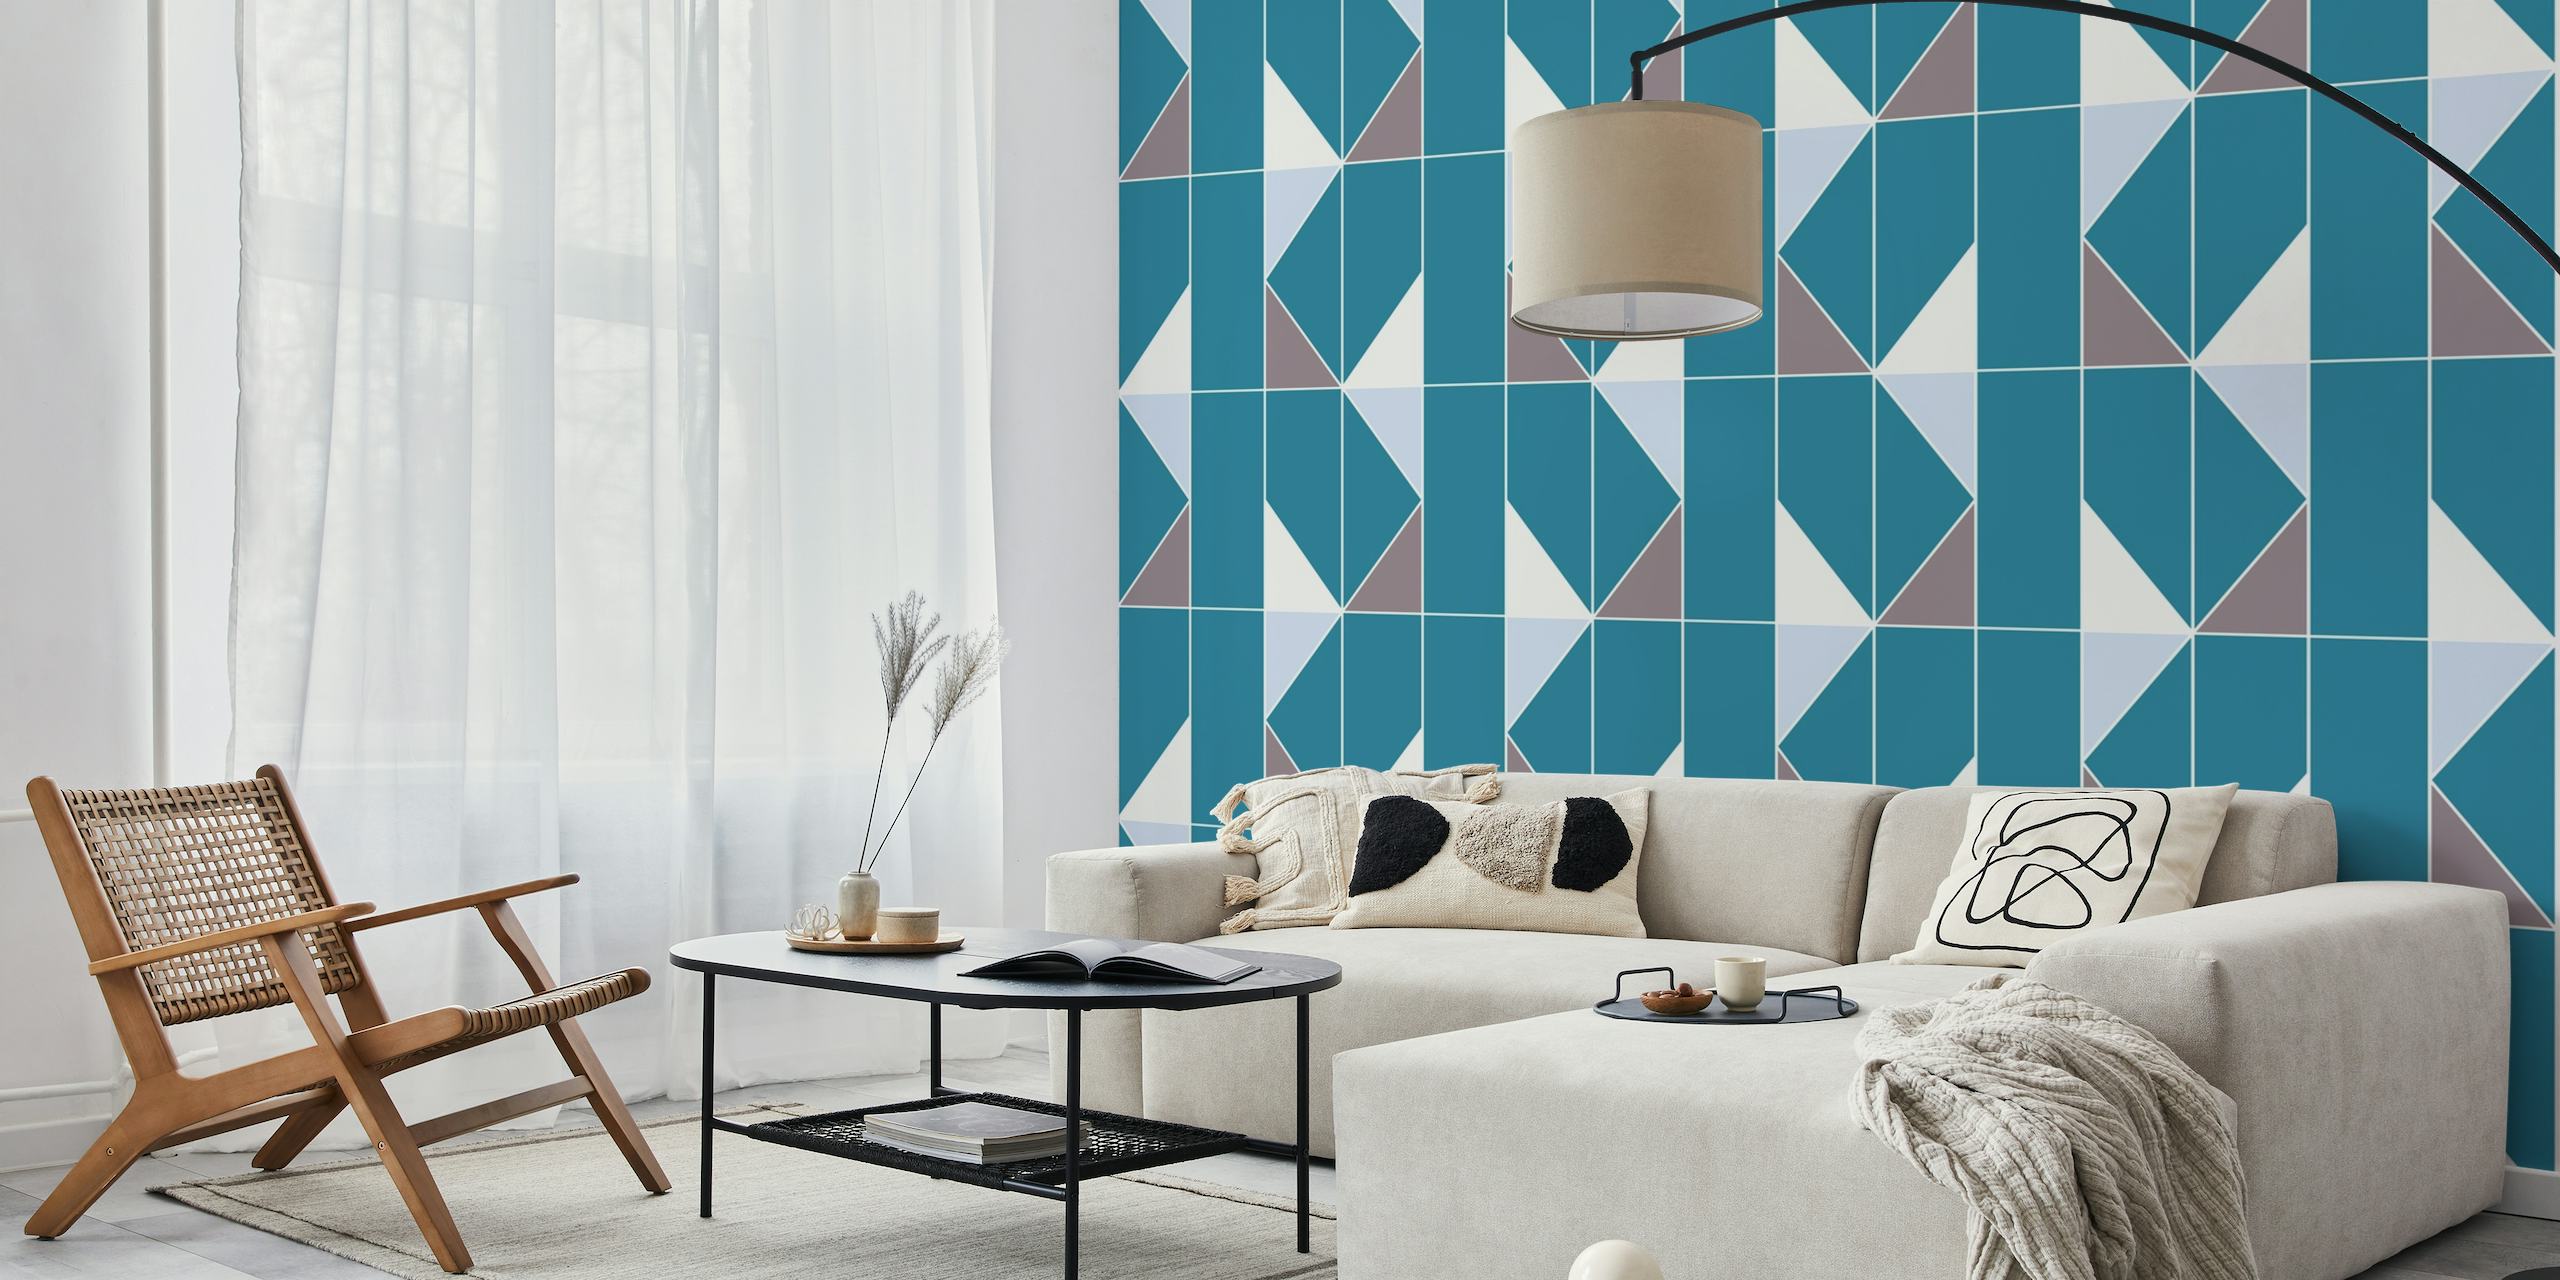 Triangle Pattern Teal White behang